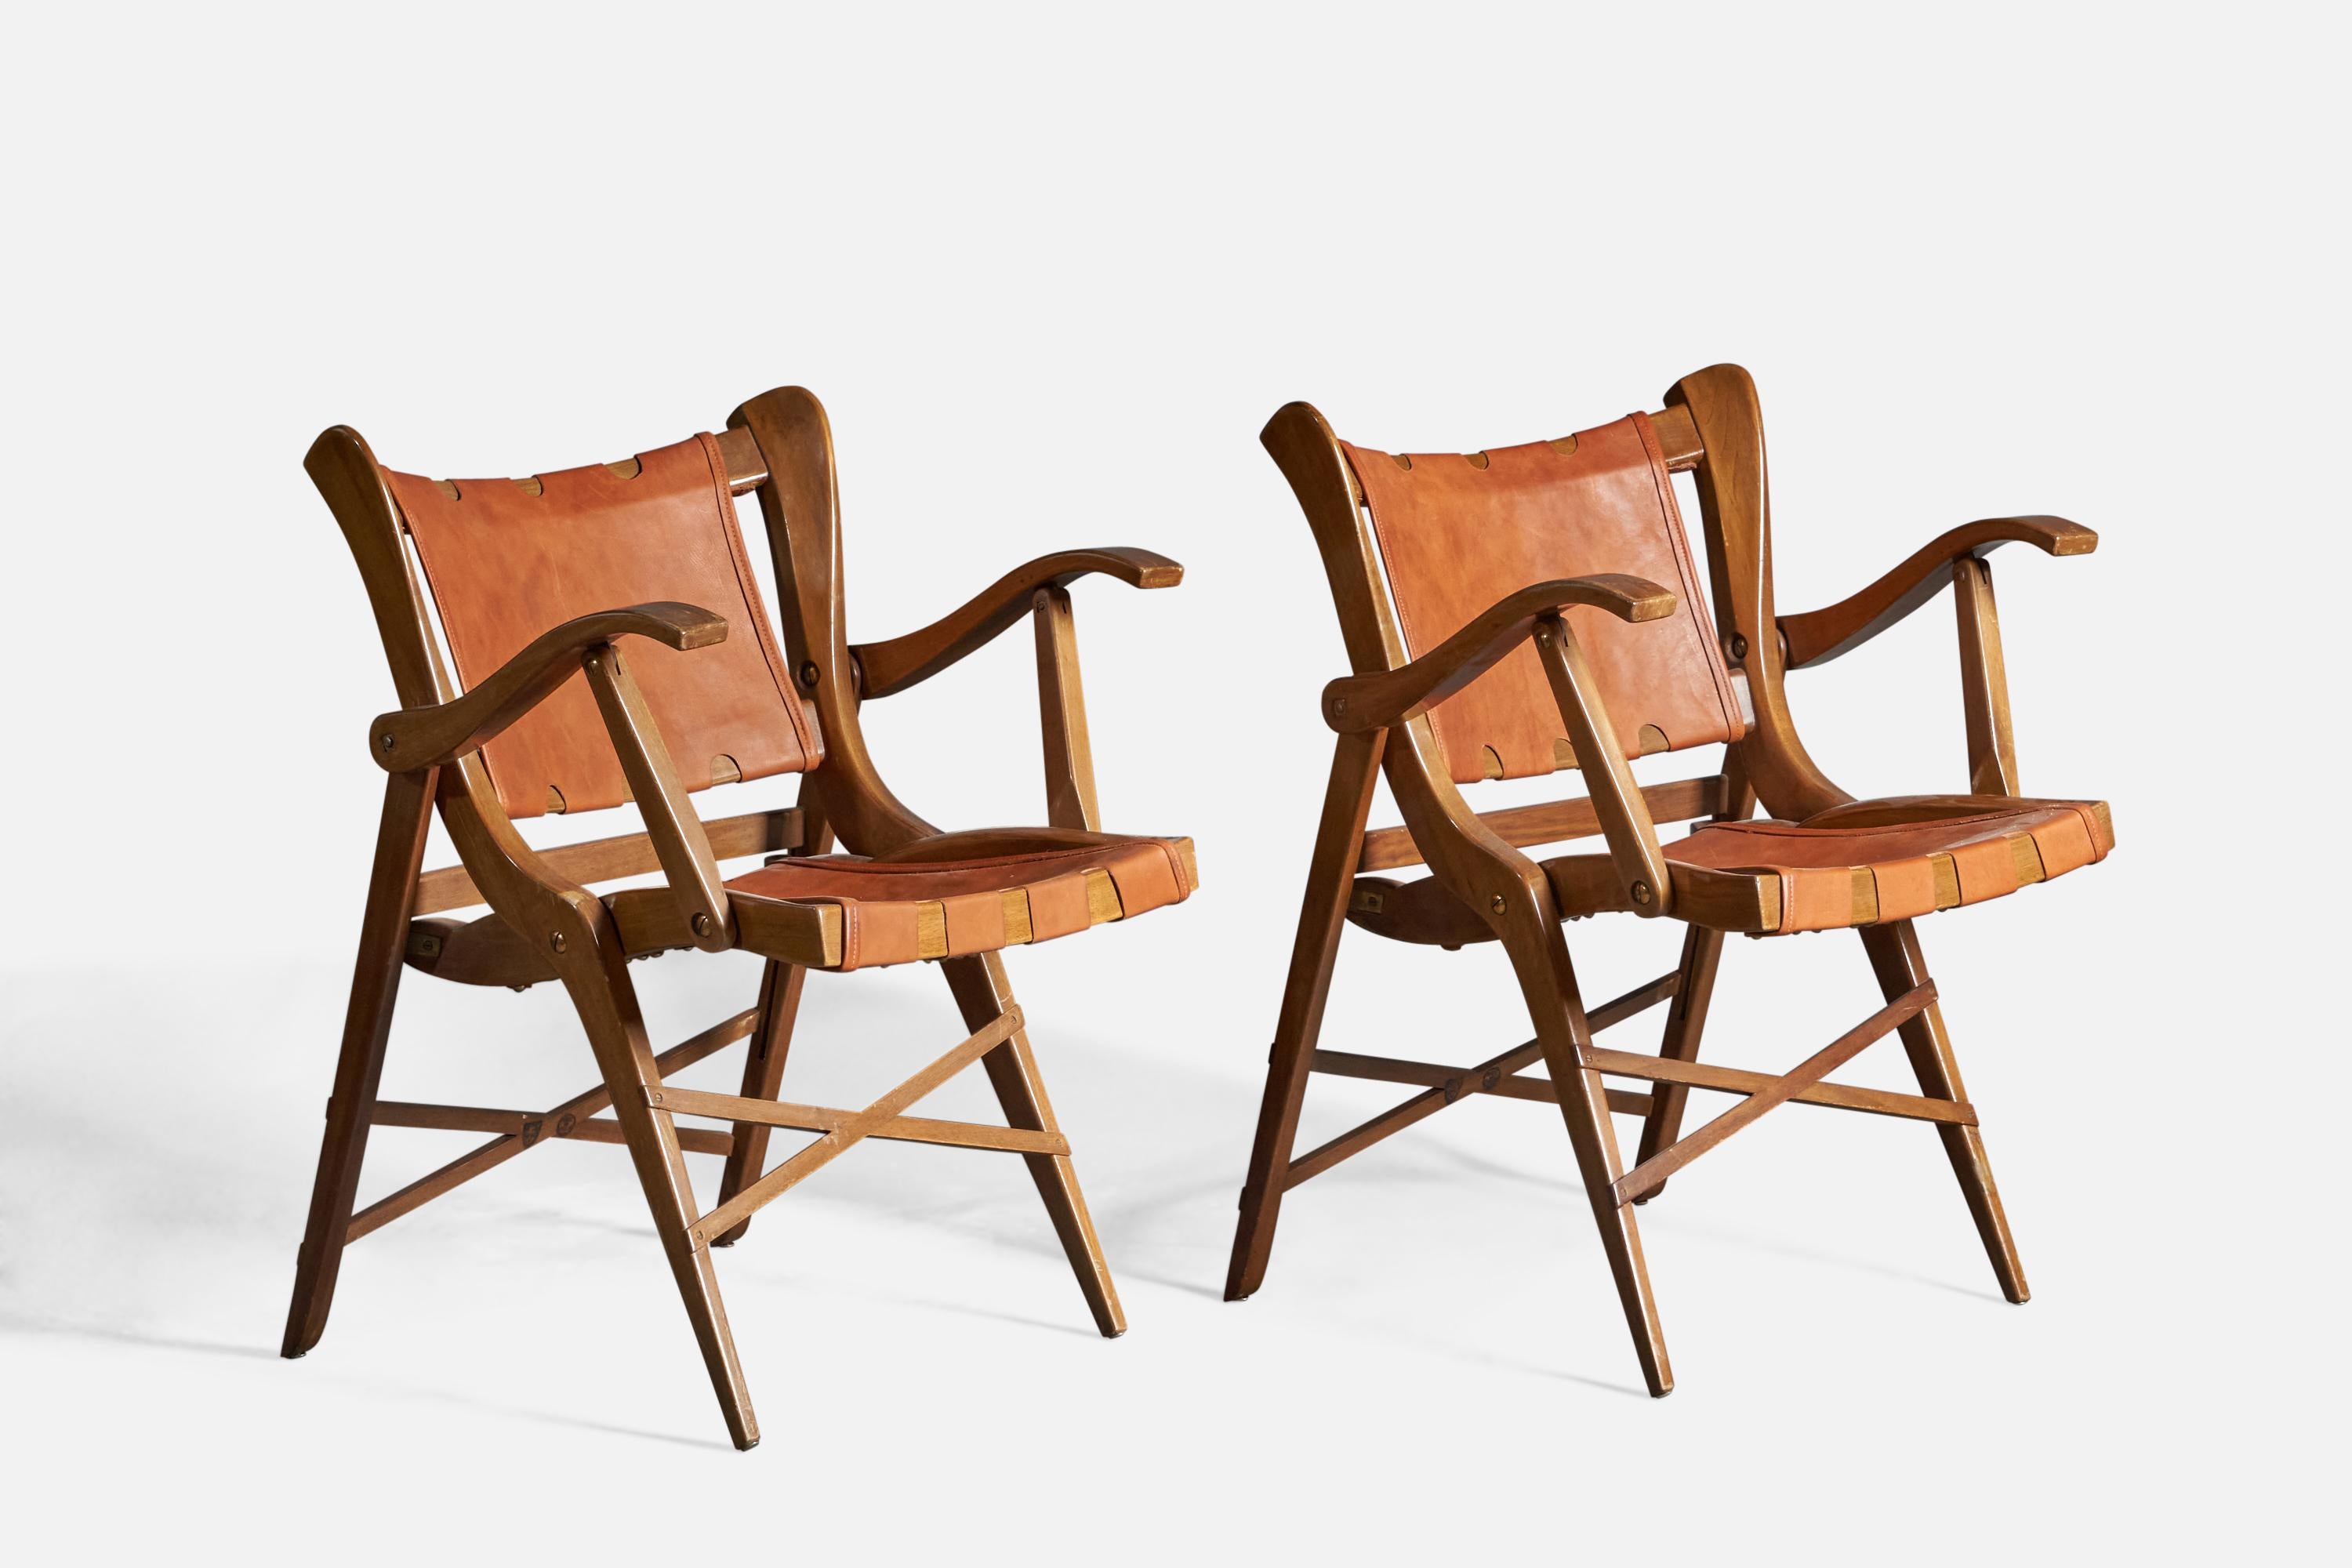 A pair of walnut and leather folding lounge chairs or side chairs, designed and produced by Guglielmo Pecorini, Italy, c. 1940s.
